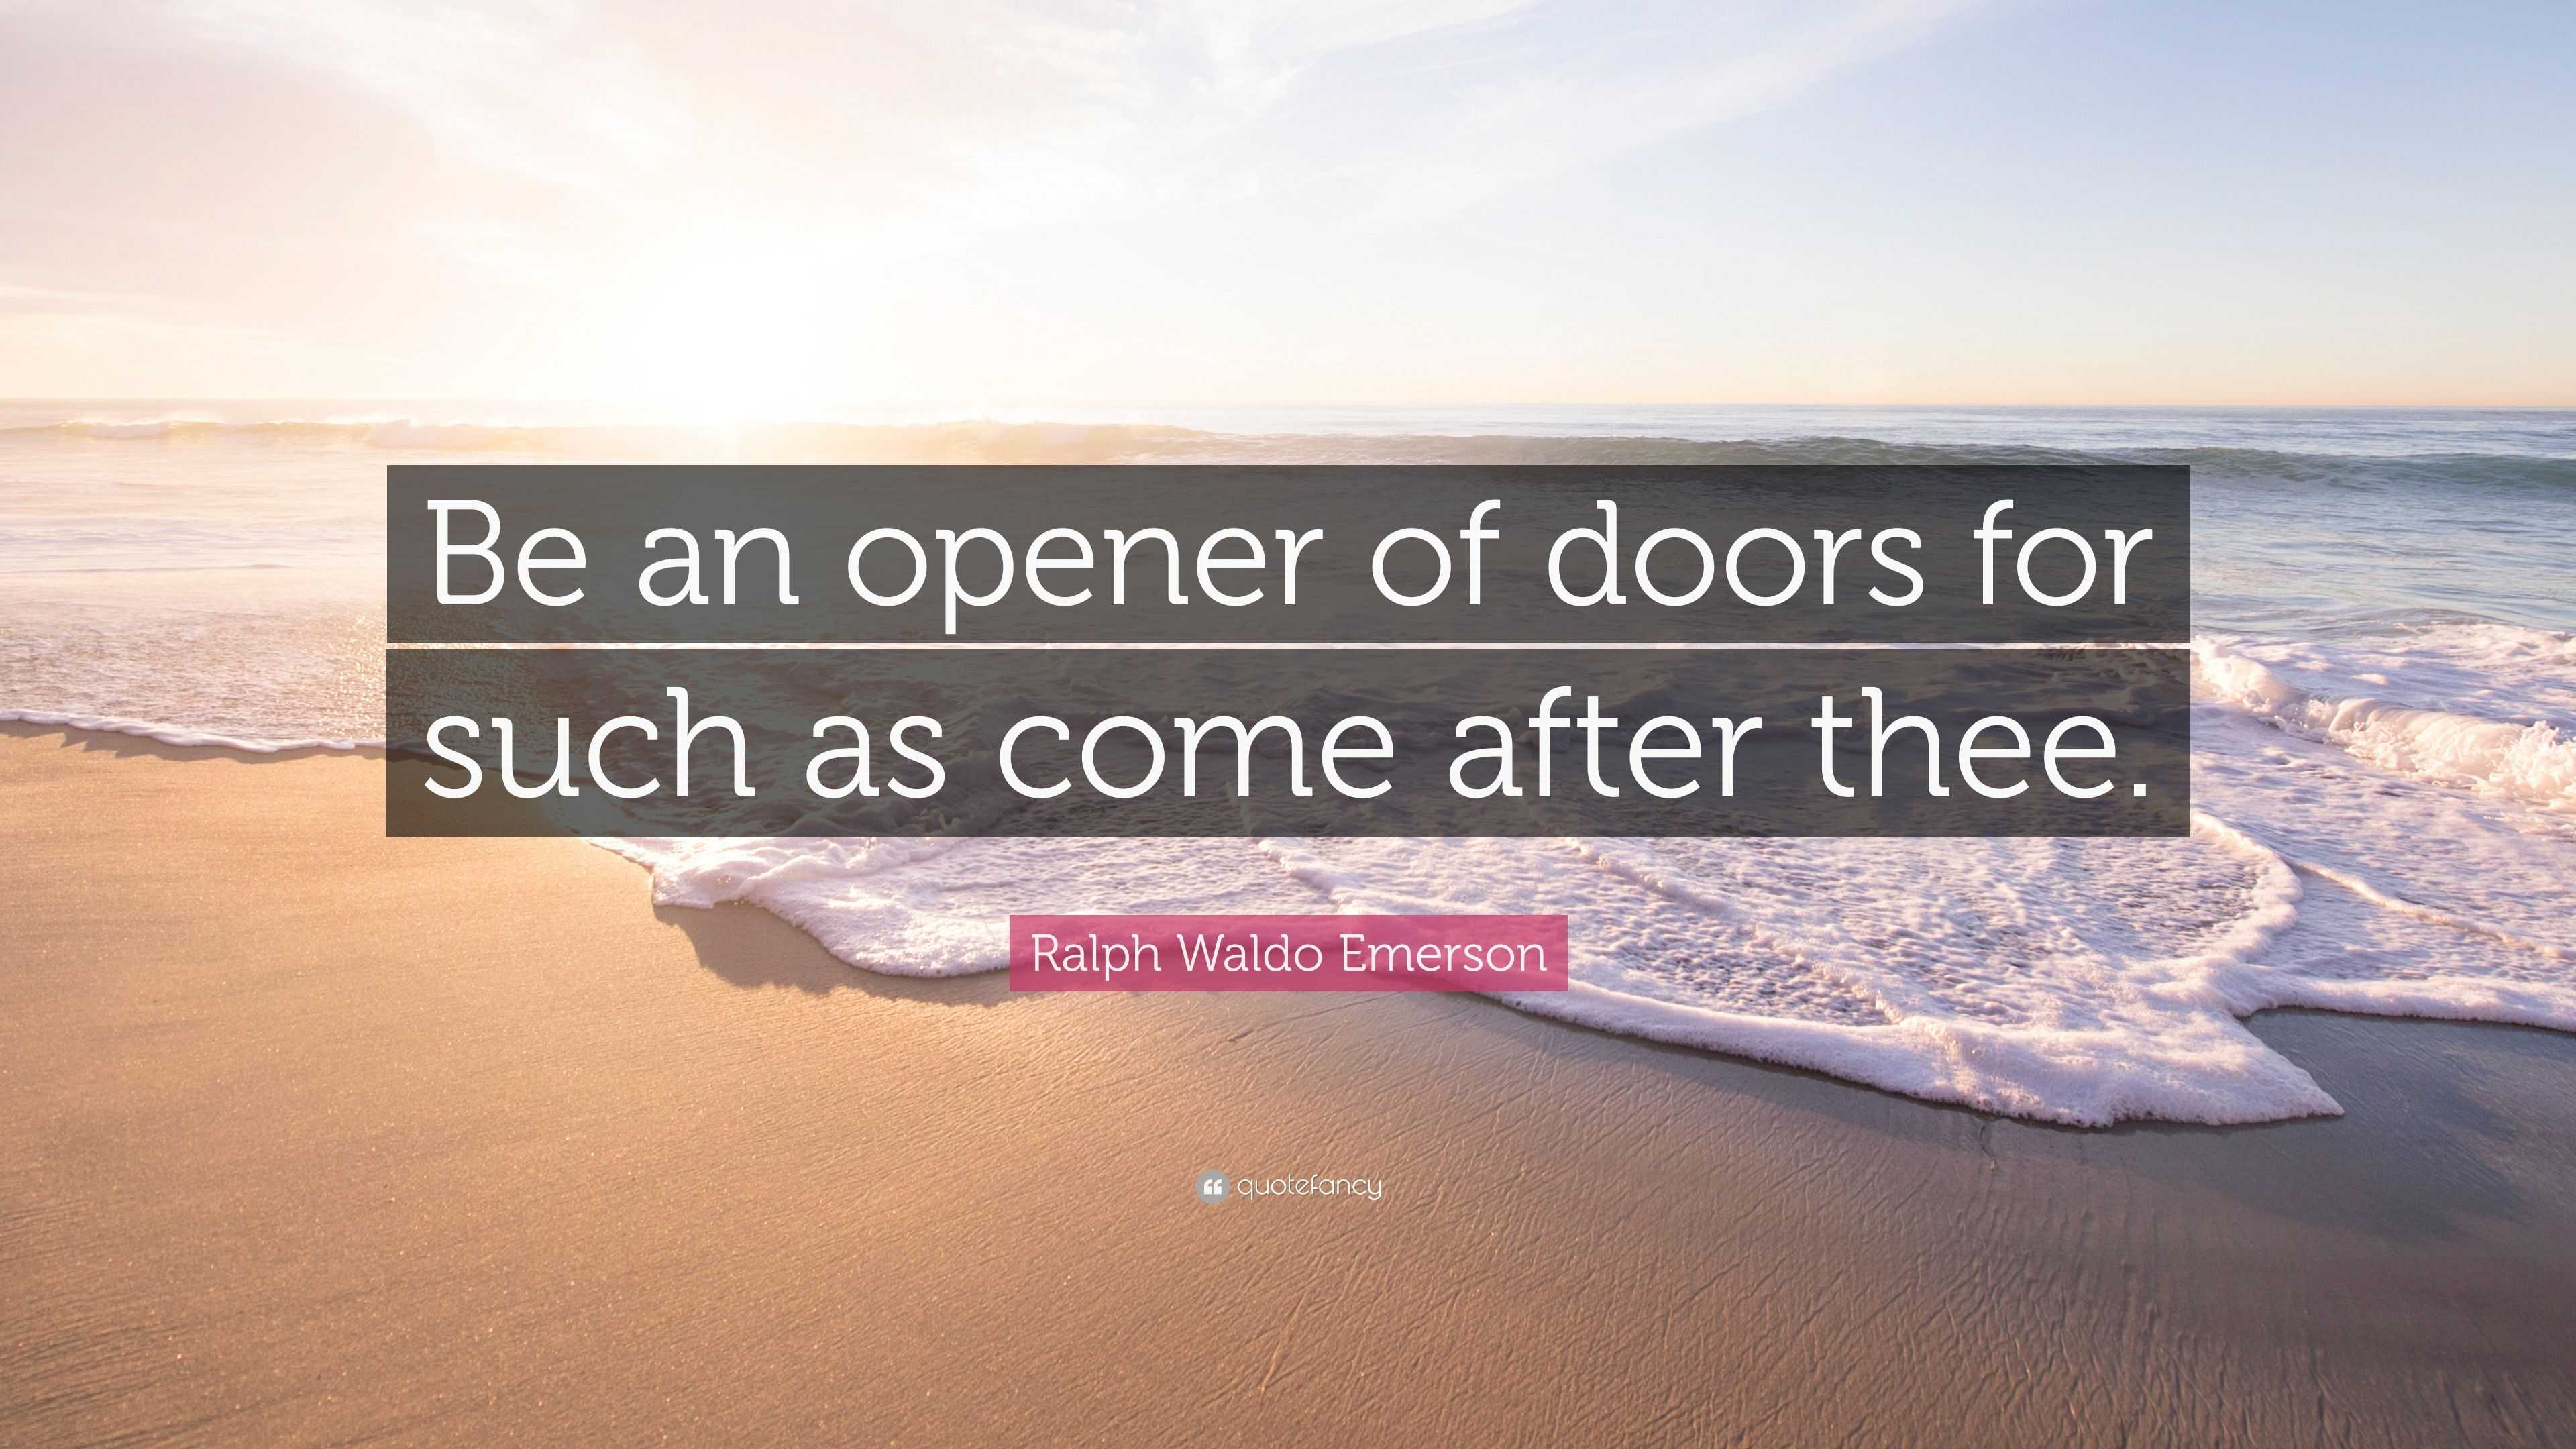 https://quotefancy.com/media/wallpaper/3840x2160/3719375-Ralph-Waldo-Emerson-Quote-Be-an-opener-of-doors-for-such-as-come.jpg